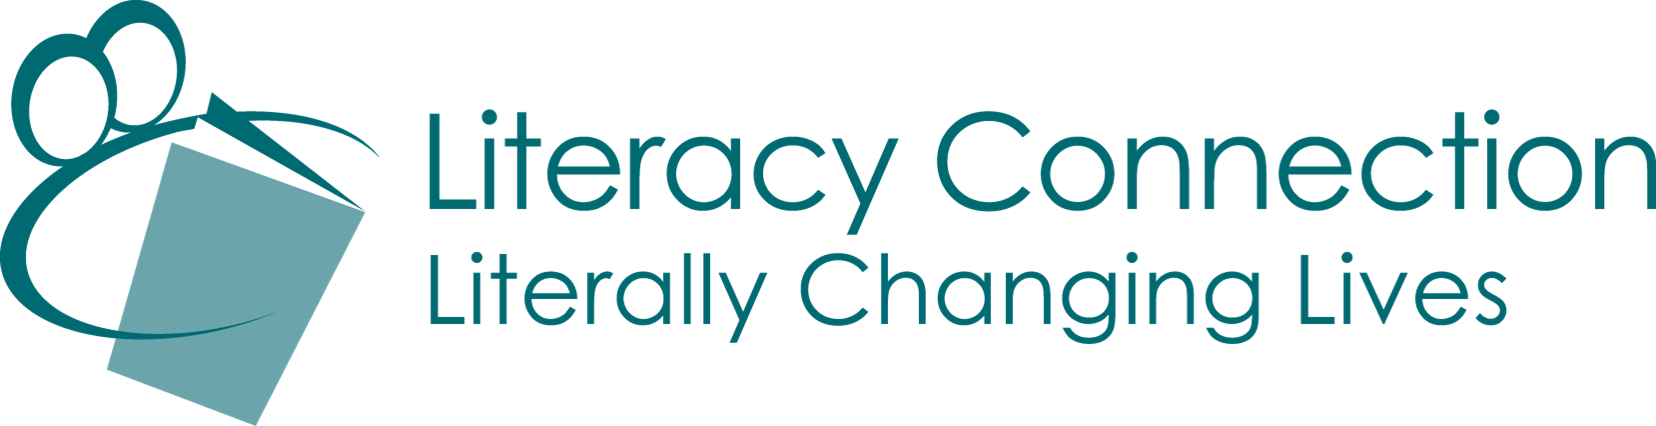 The Literacy Connection logo